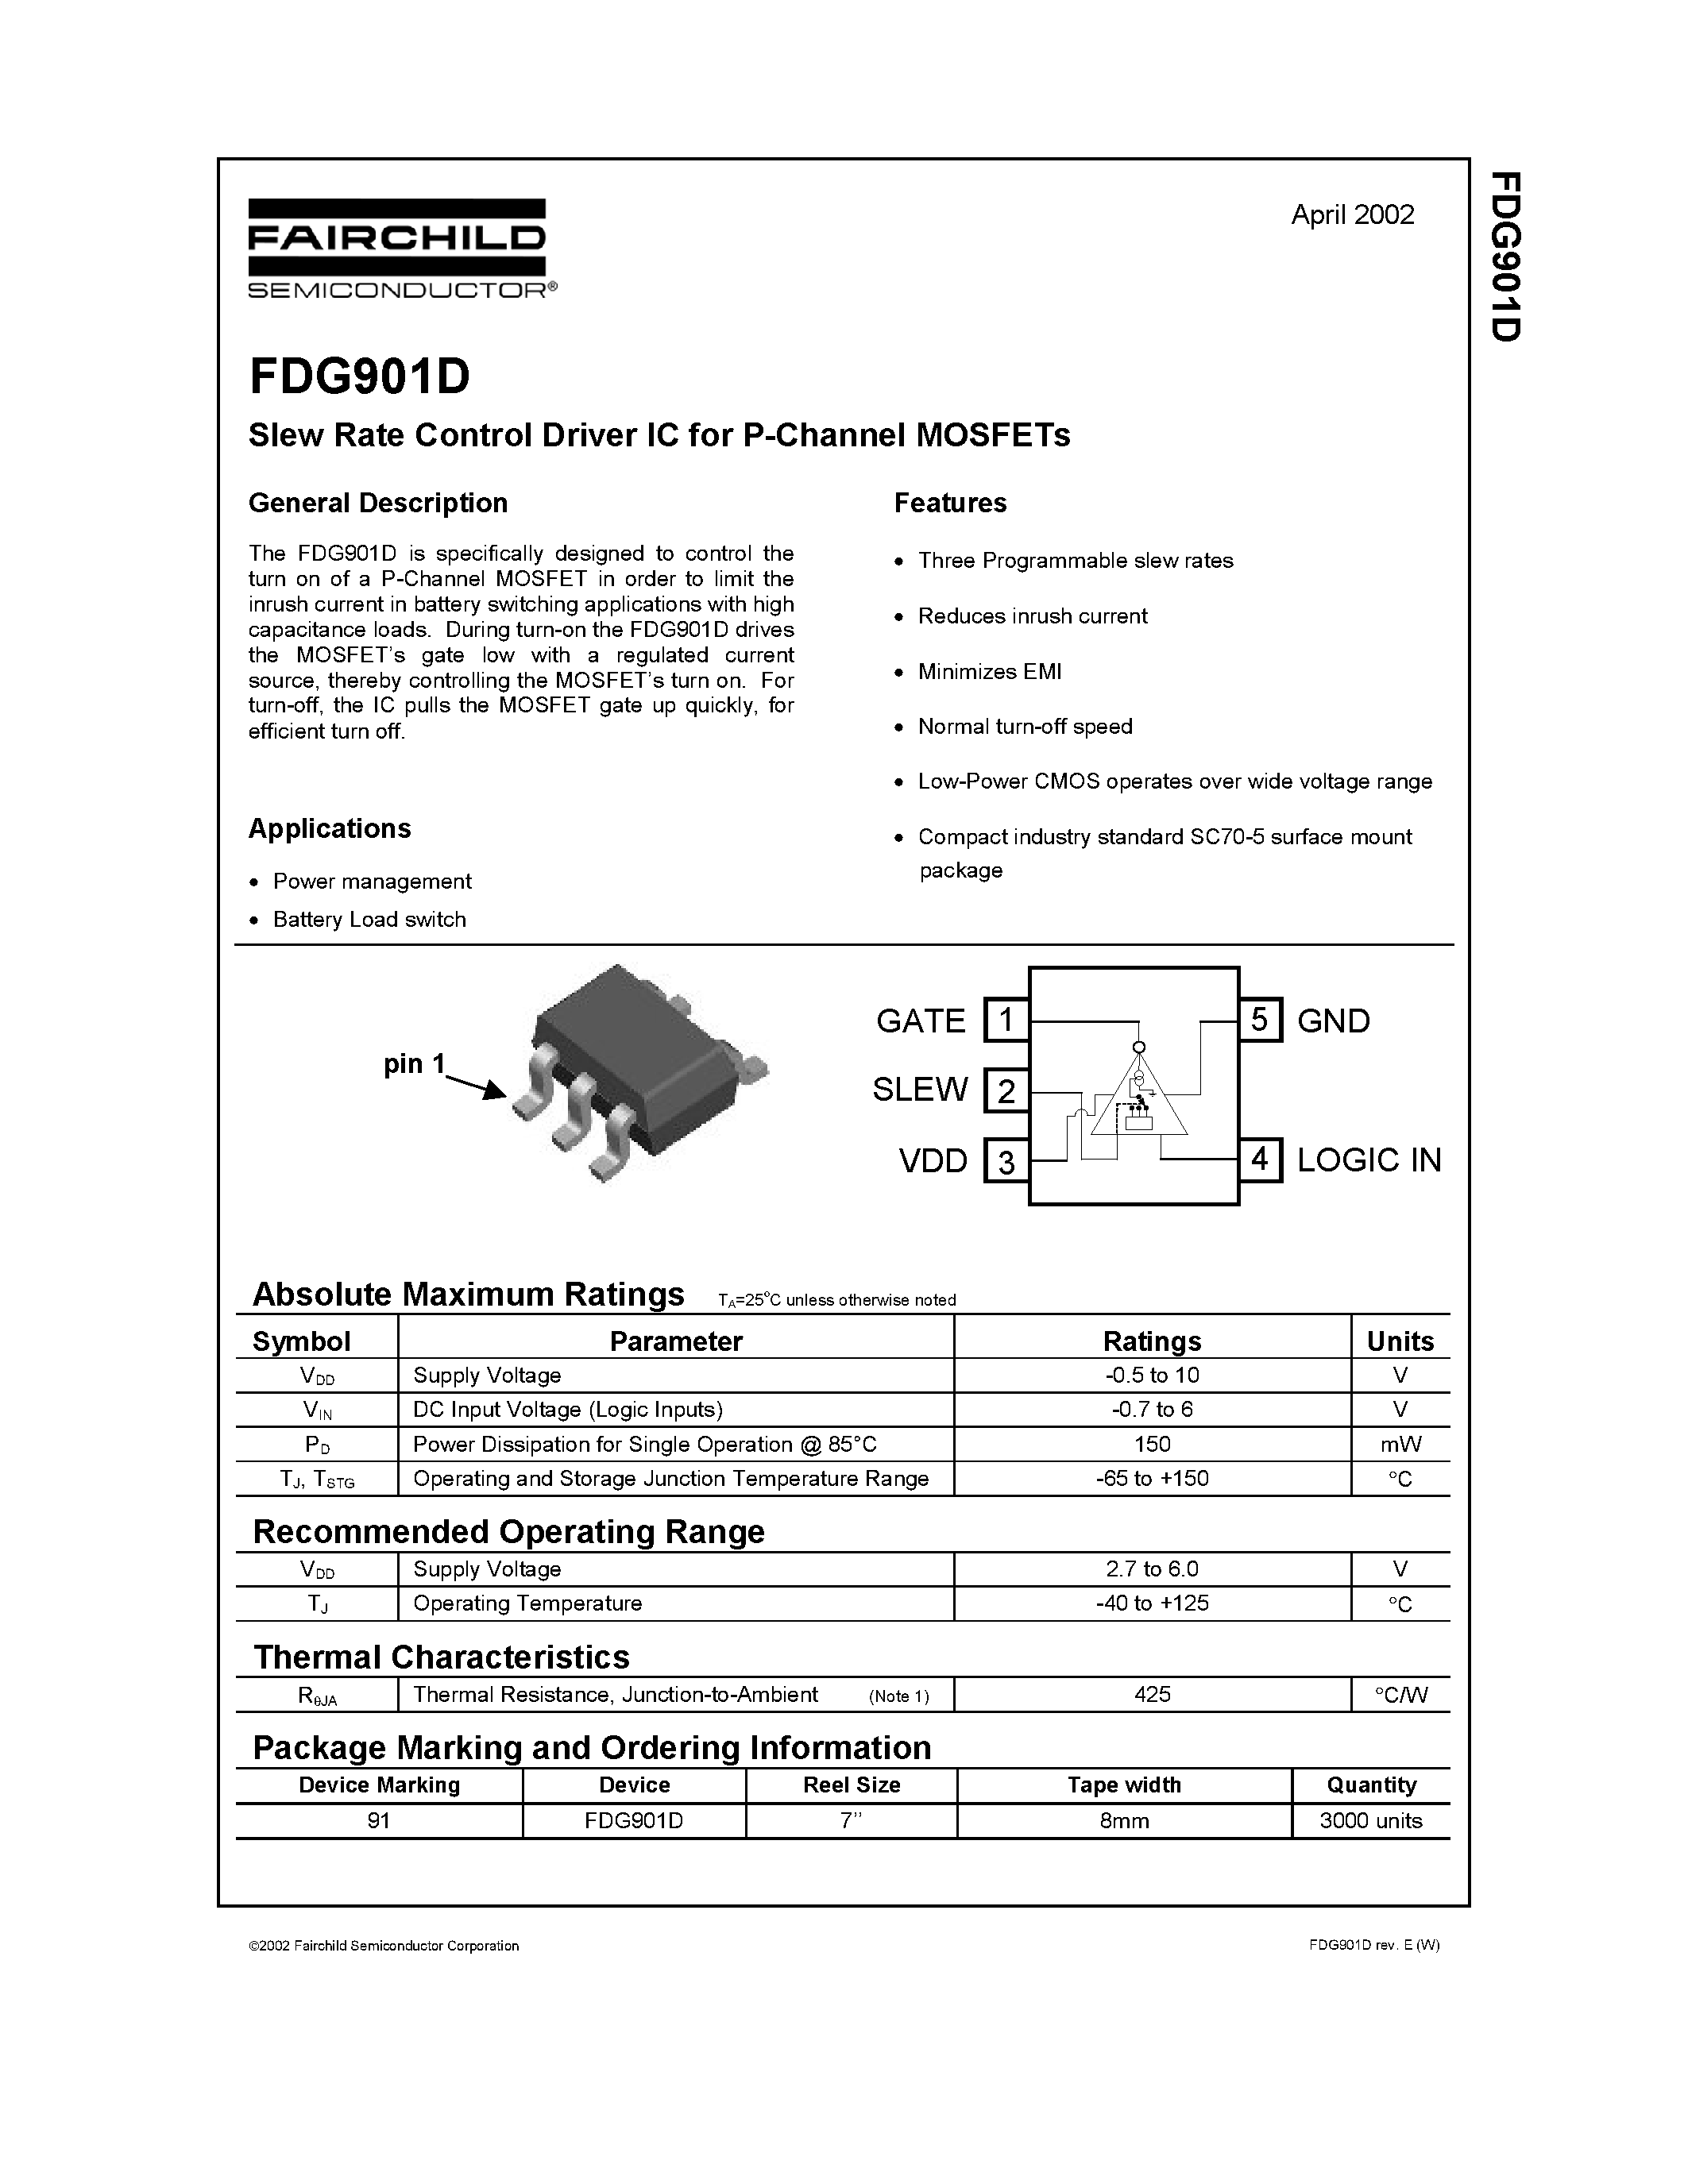 Datasheet FDG901 - Slew Rate Control Driver IC for P-Channel MOSFETs page 1